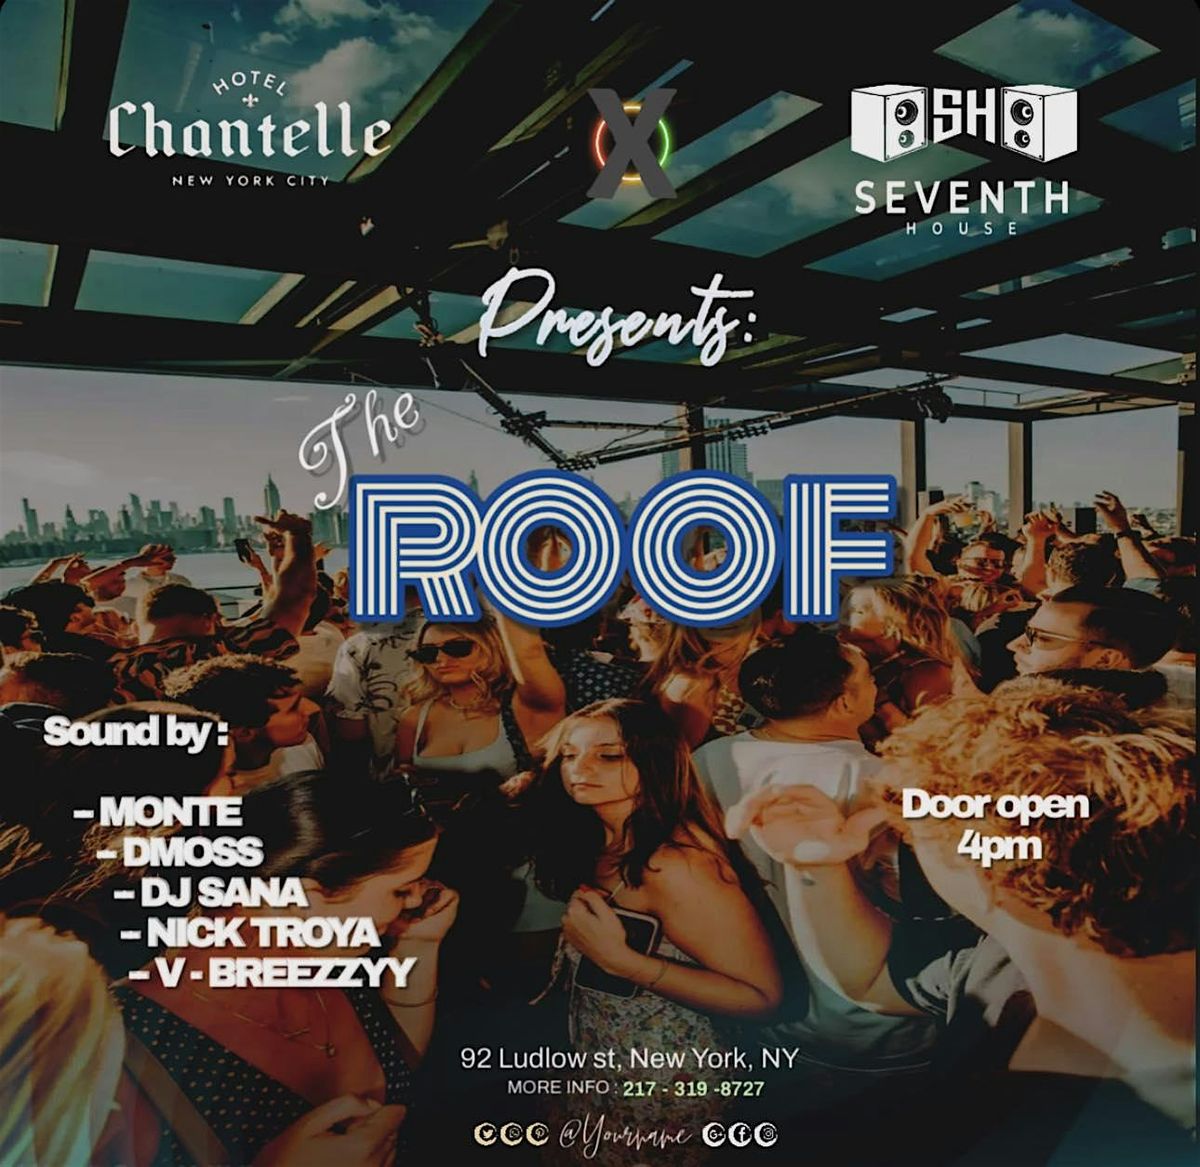 THE ROOF AT CHANTELLE